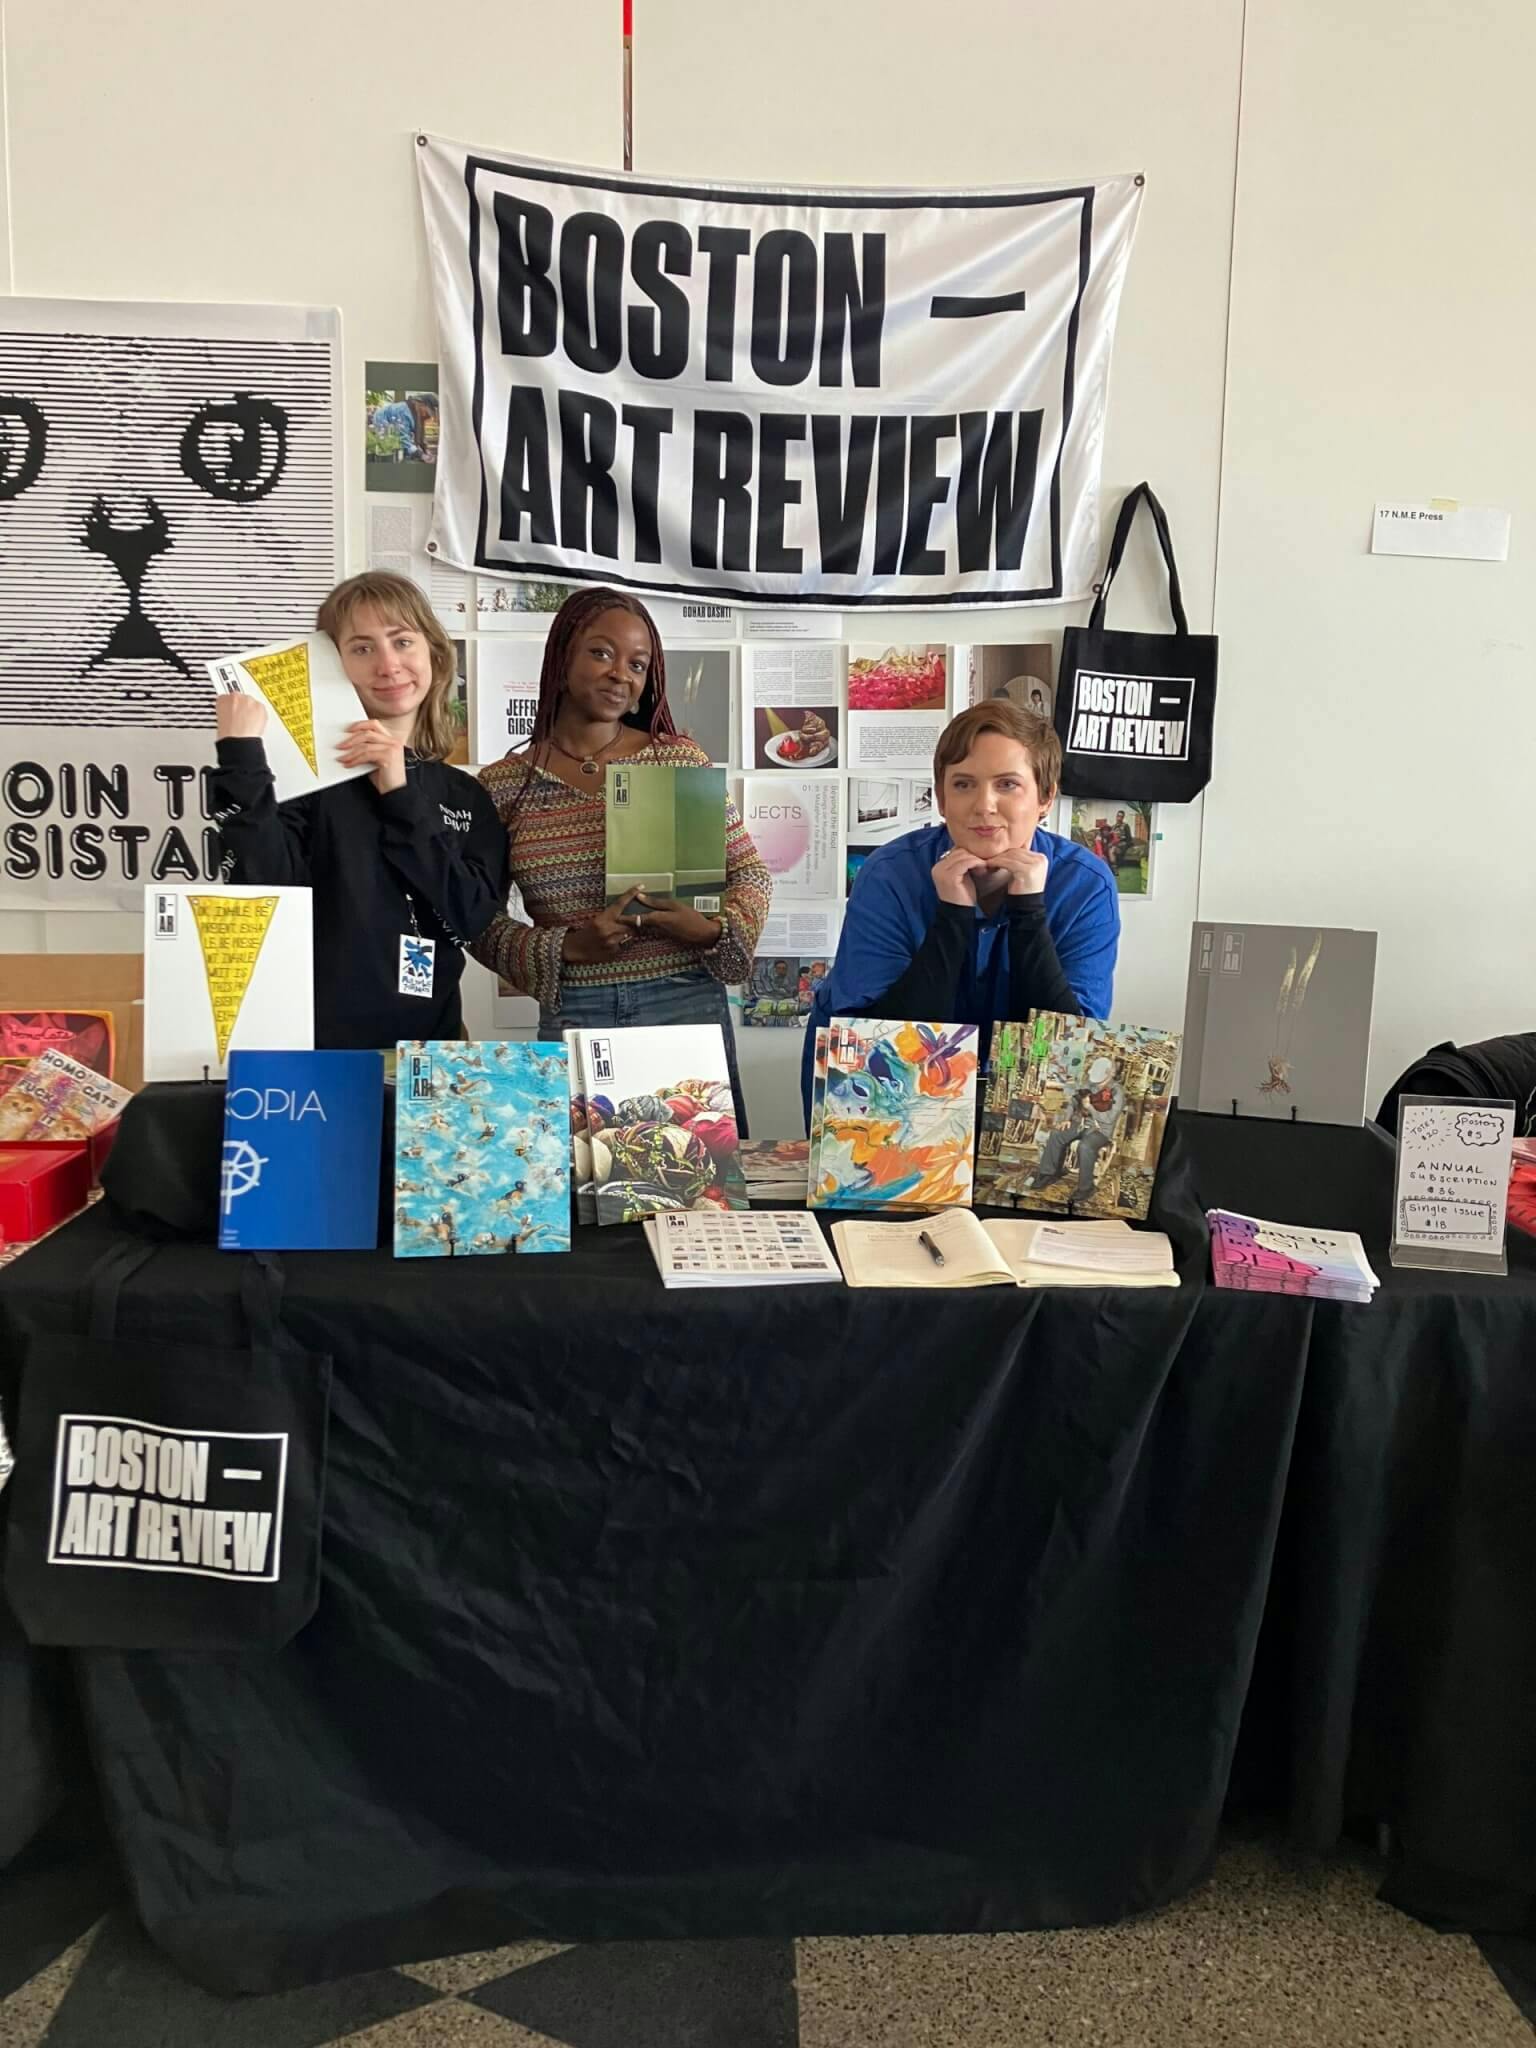 Three of the Boston Art Review team tabling at the 2023 Multiple Formats book fair. They pose behind a table that flaunts many previous issues, and beneath a Boston Art Review flag.